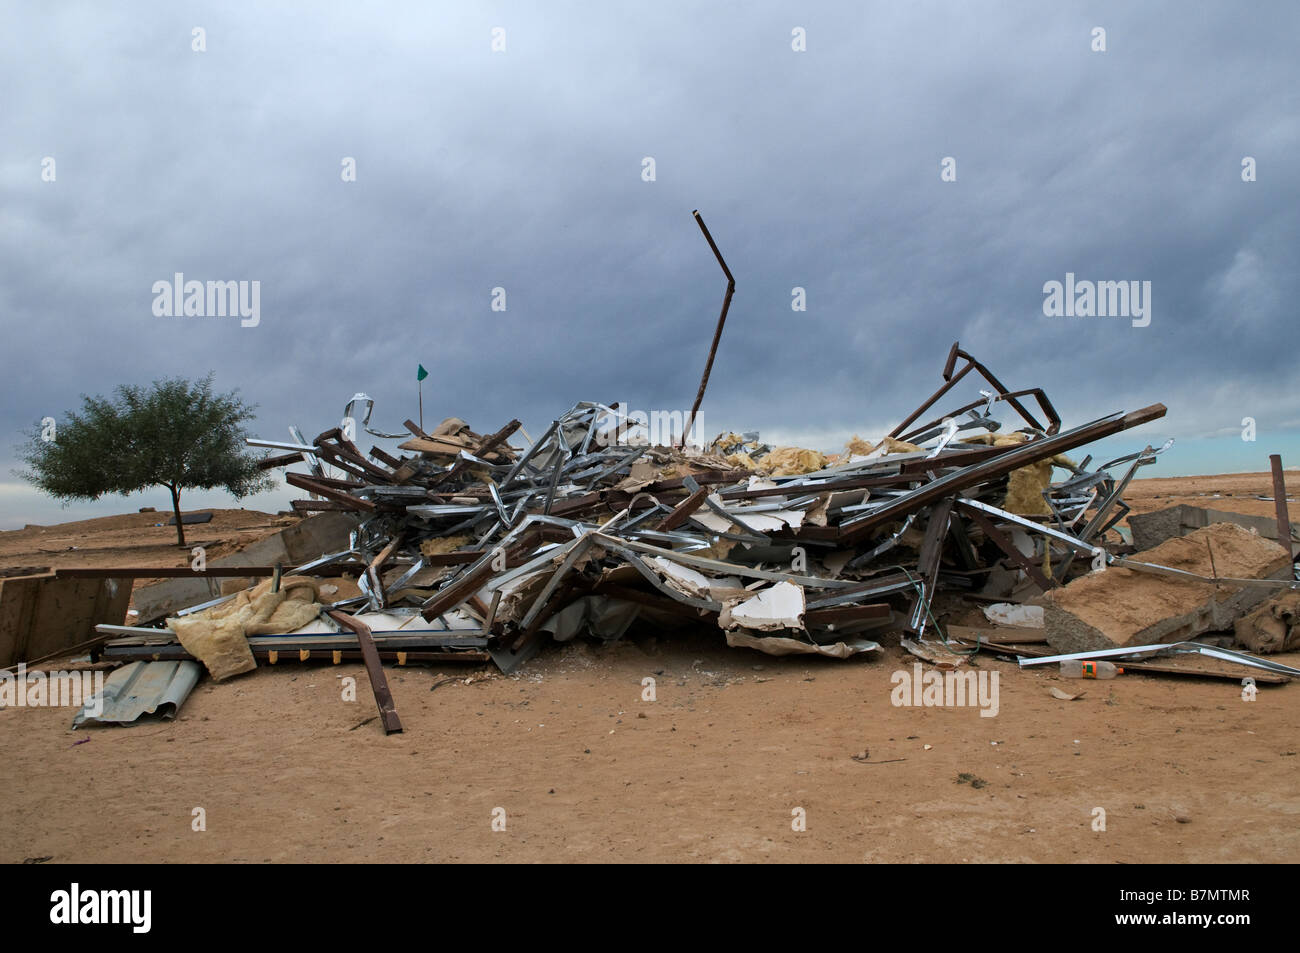 Ruins of a home demolished by Israeli authorities in Abdallah Al Atrash an unrecognized Bedouin village in the Negev desert Southern Israel Stock Photo